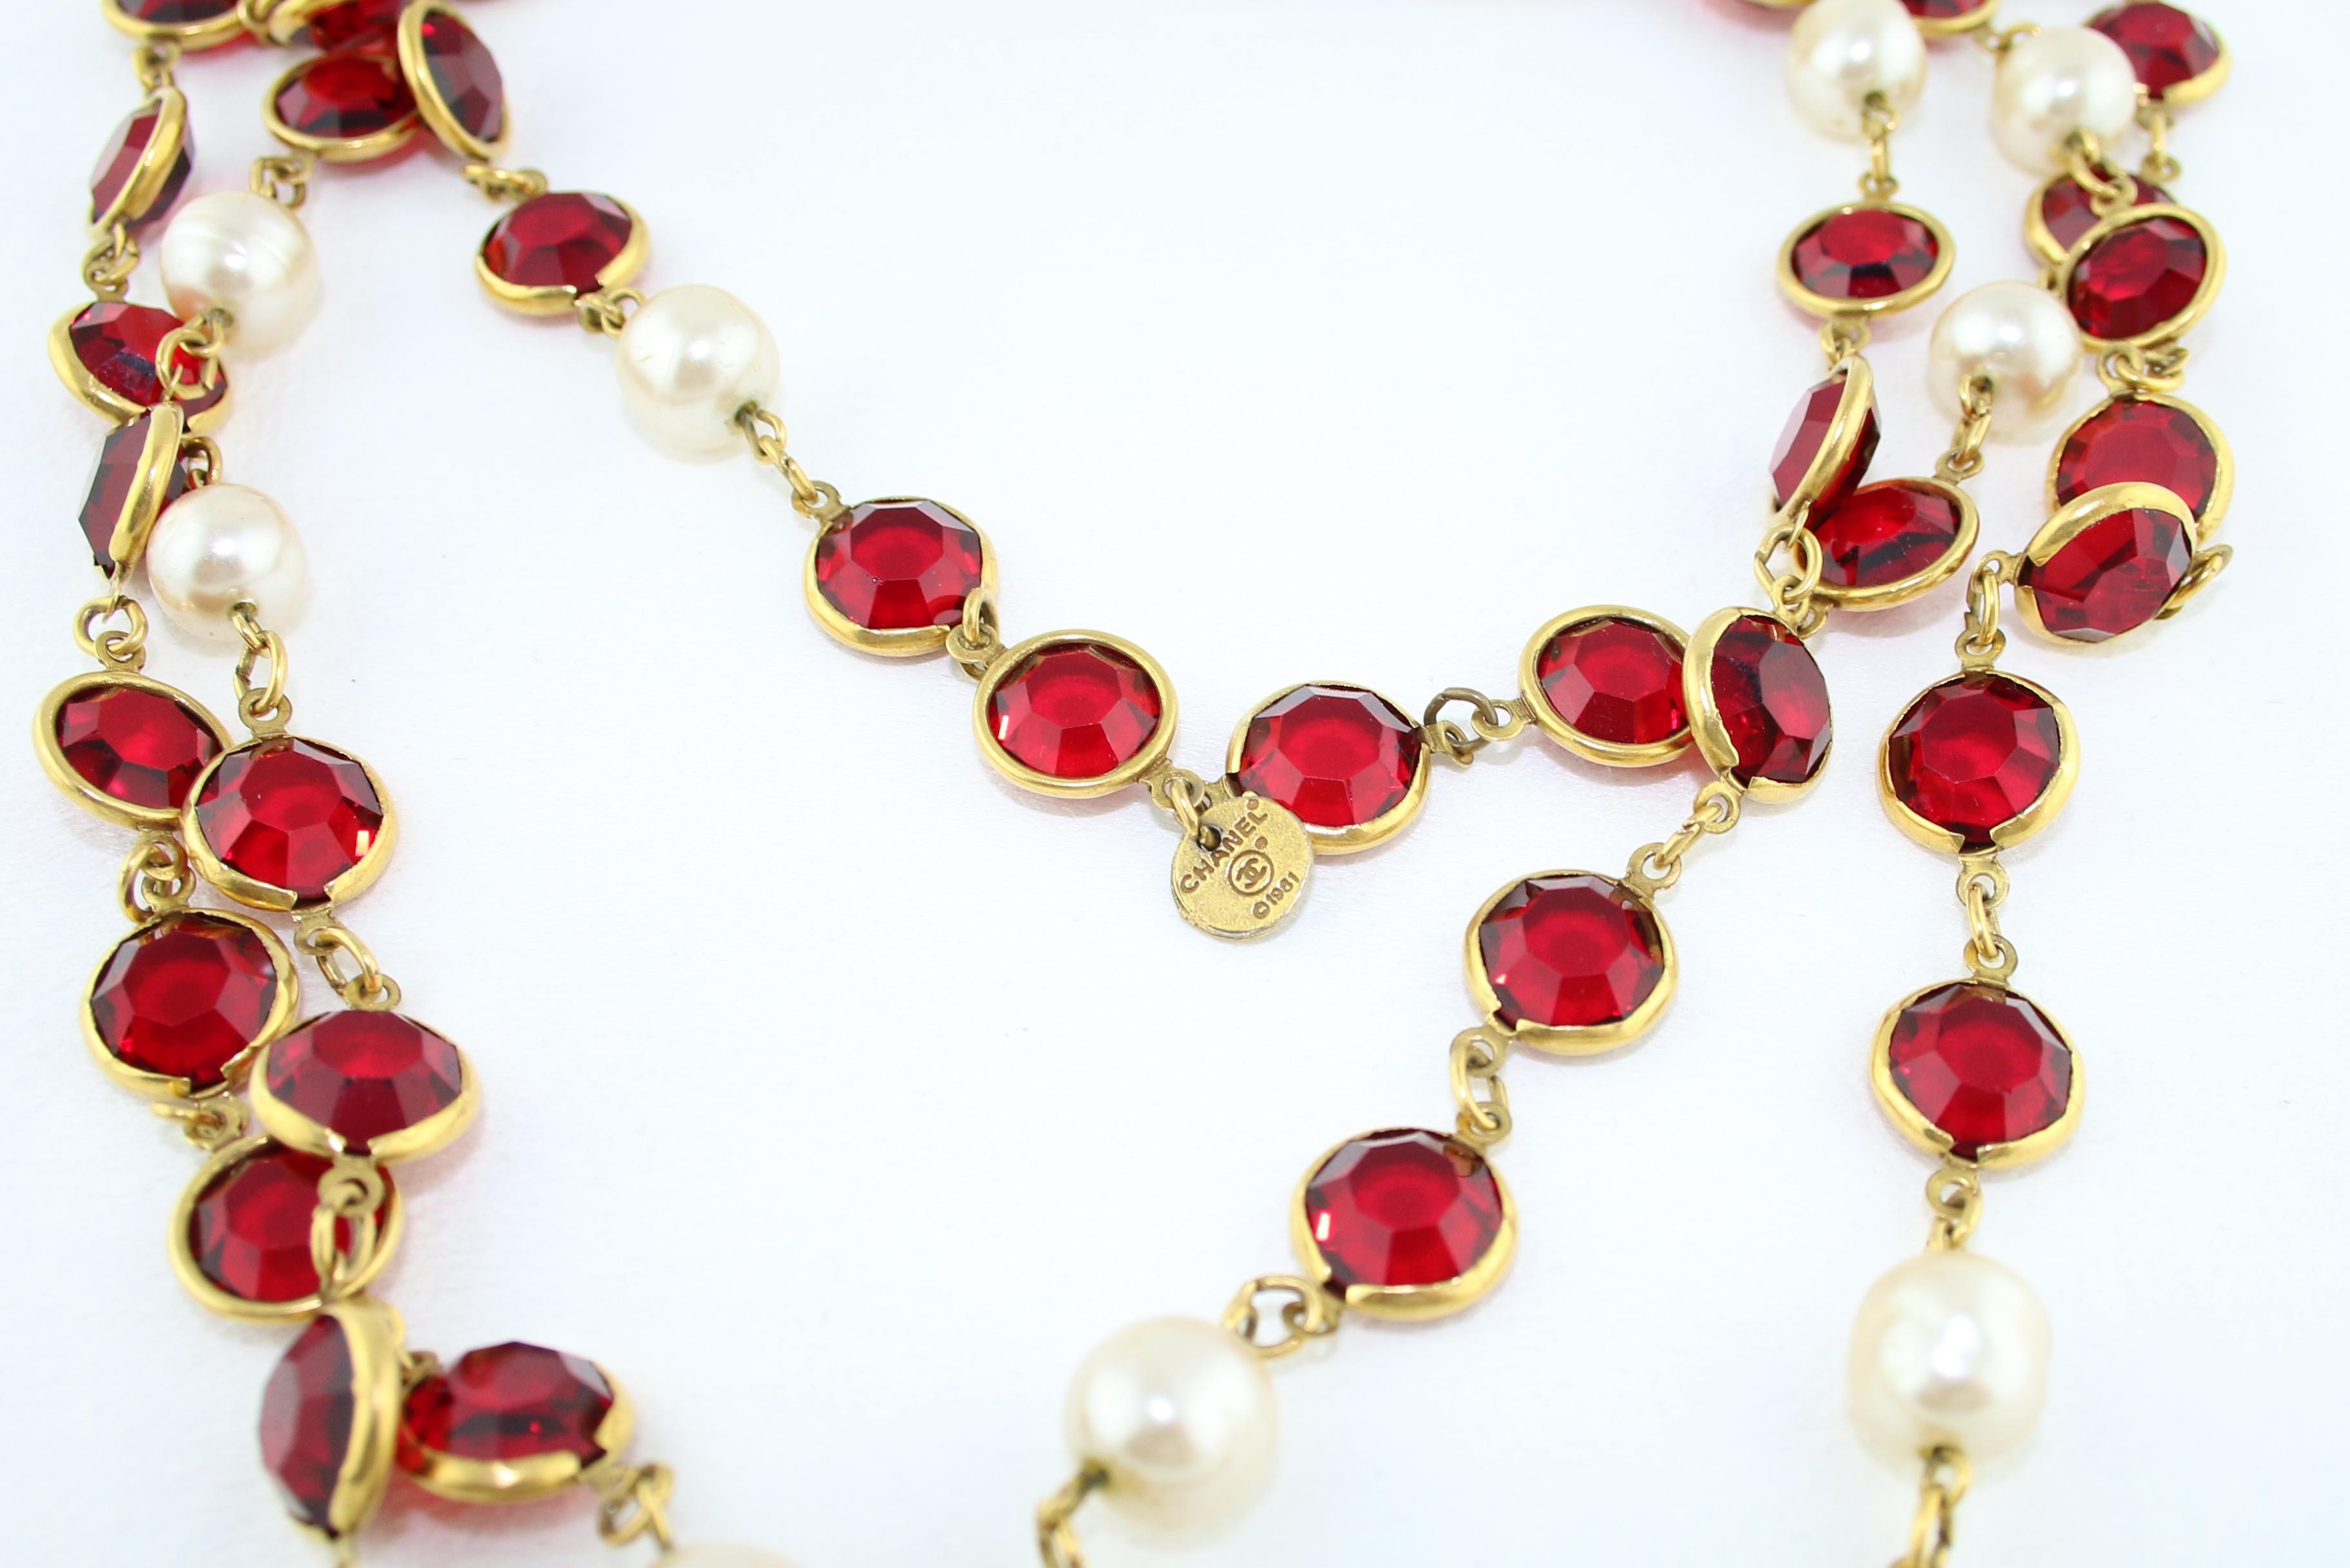 Women's Vintage CHANEL 1981 Faux Pearl & Red Gripoix Long Necklace For Sale